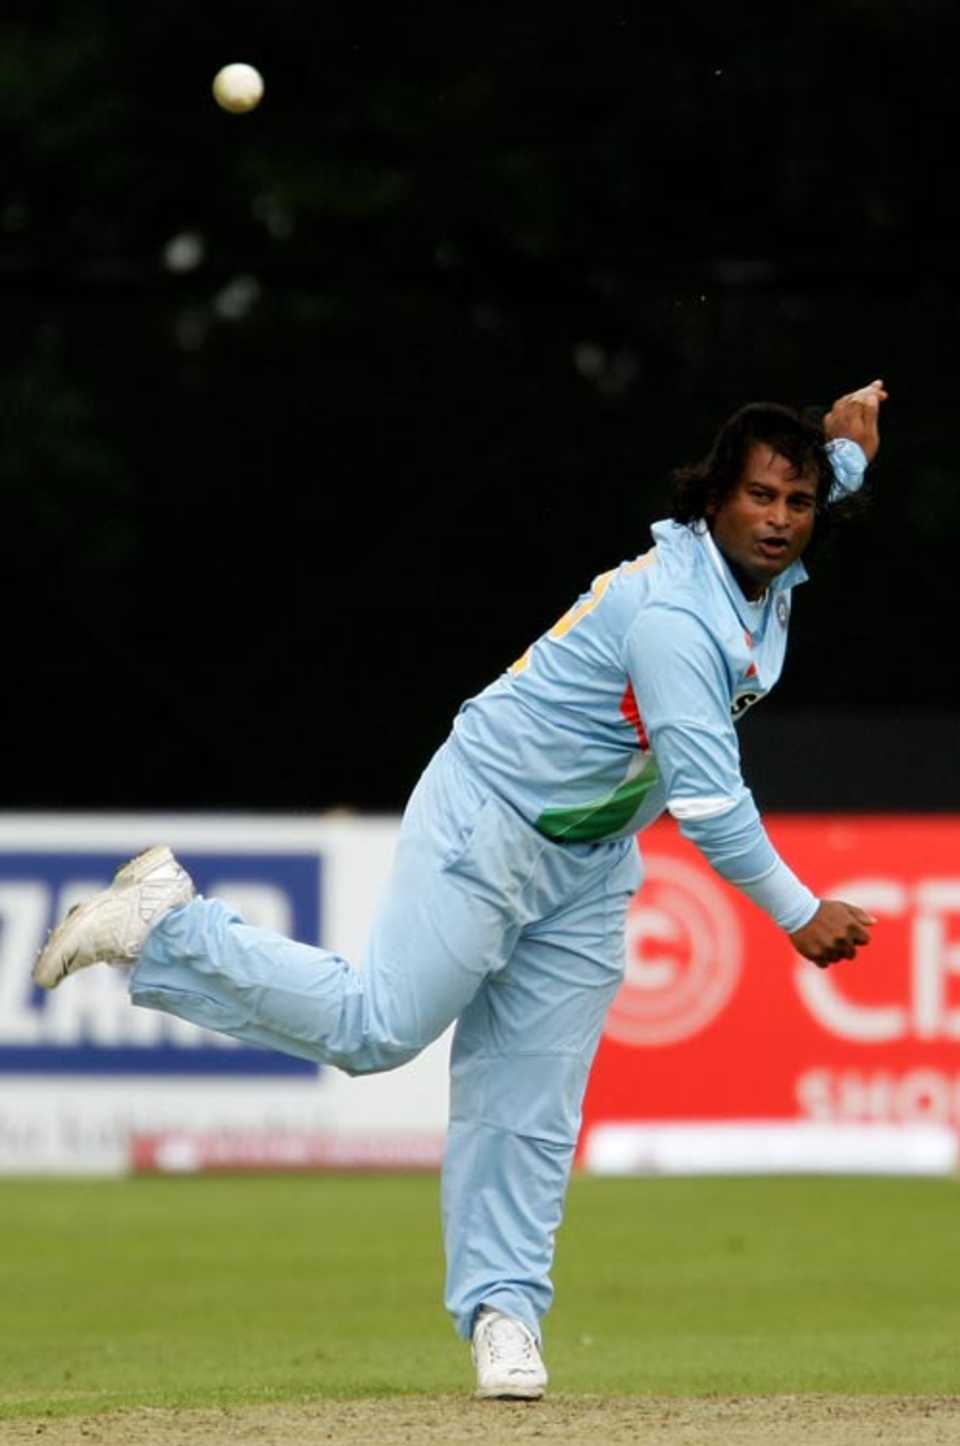 Ramesh Powar bowled accurately and finished with figures of 1 for 39